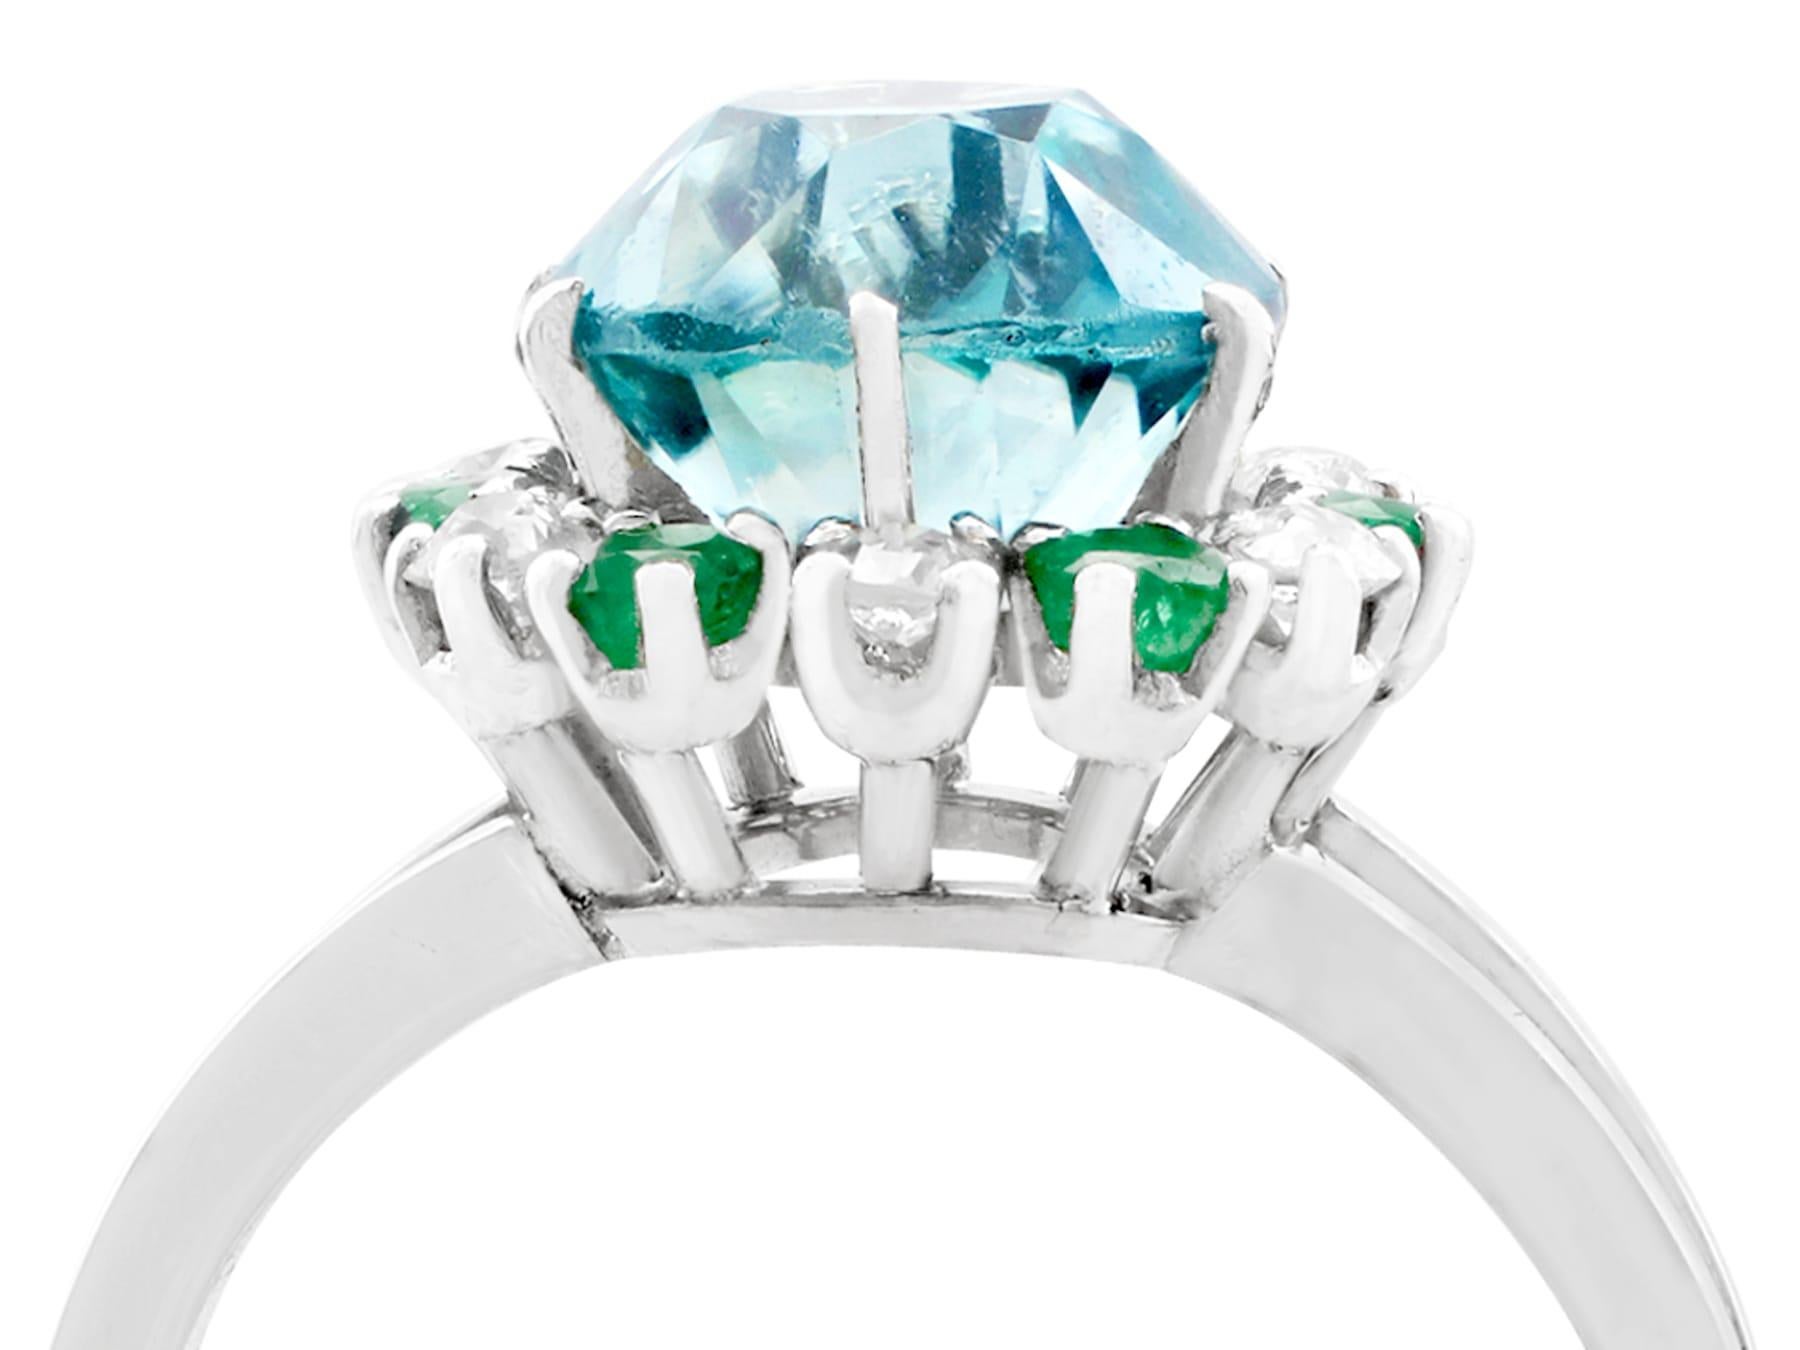 An impressive vintage French 5.35 carat high zircon and 0.25 carat diamond, 0.24 carat emerald and 18 karat white gold, platinum set cluster ring; part of our diverse gemstone jewelry collections.

This fine and impressive unusual zircon ring has